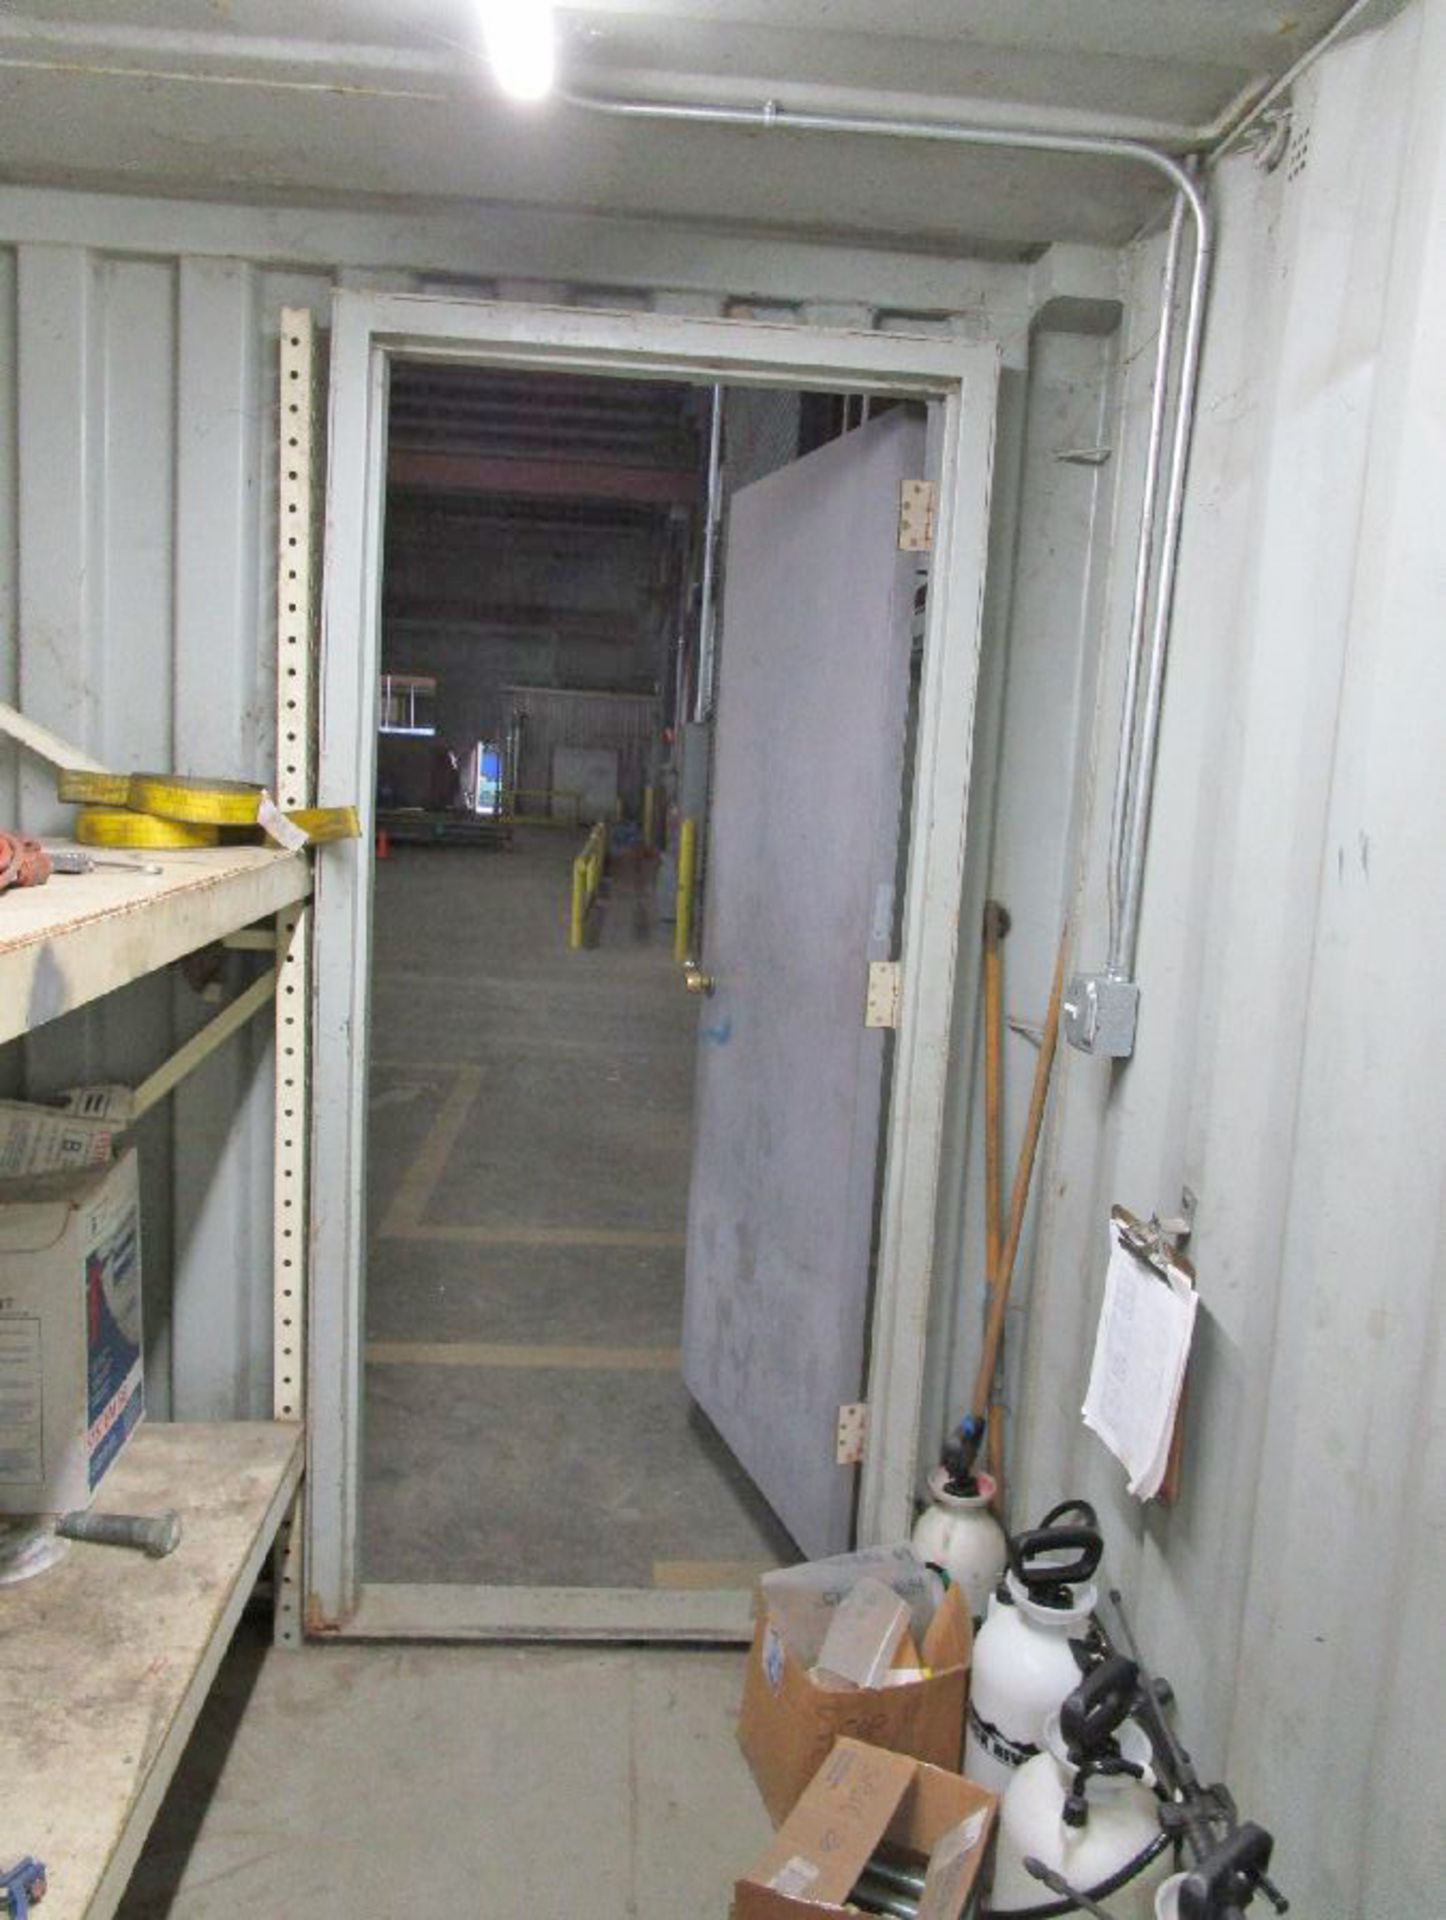 Oversea Shipping Container - Image 5 of 14